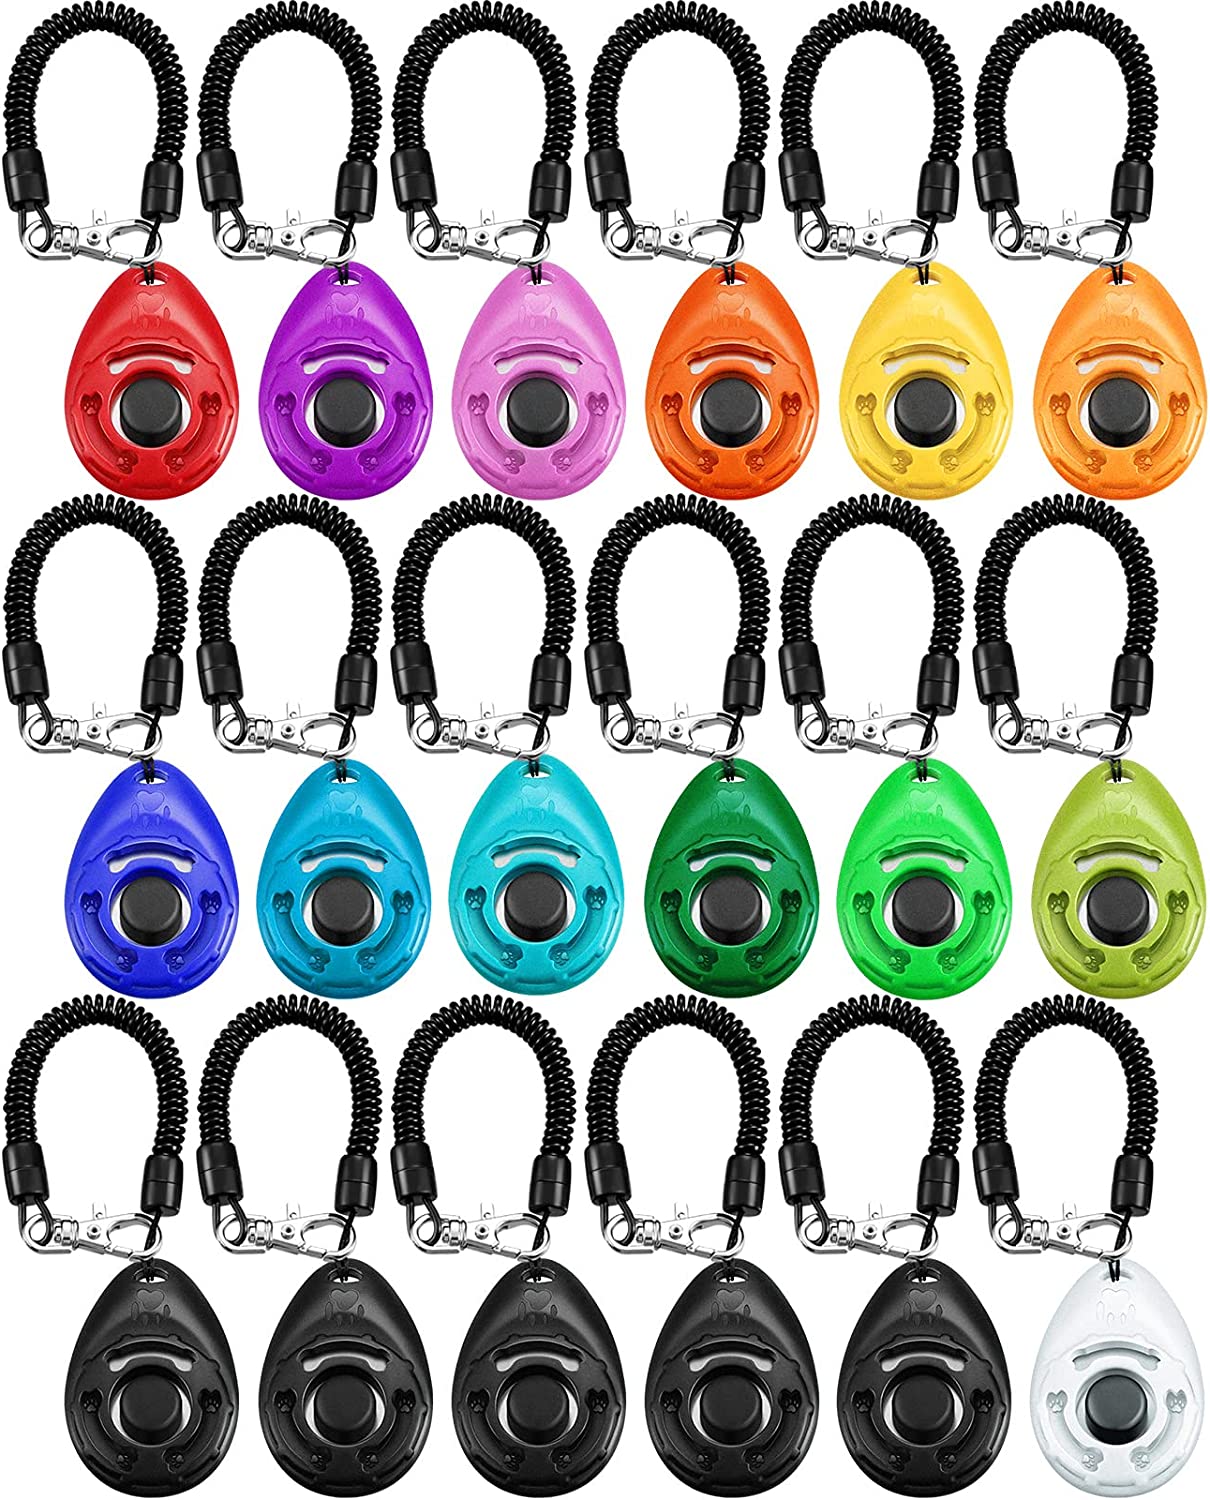 SunGrow 7-Pack Dog Clicker for Training with Wrist Bands, 2 Inches  Multicolor, Pet Cat Dog Training Clickers & Behavior Aids, Convenient and  Effective